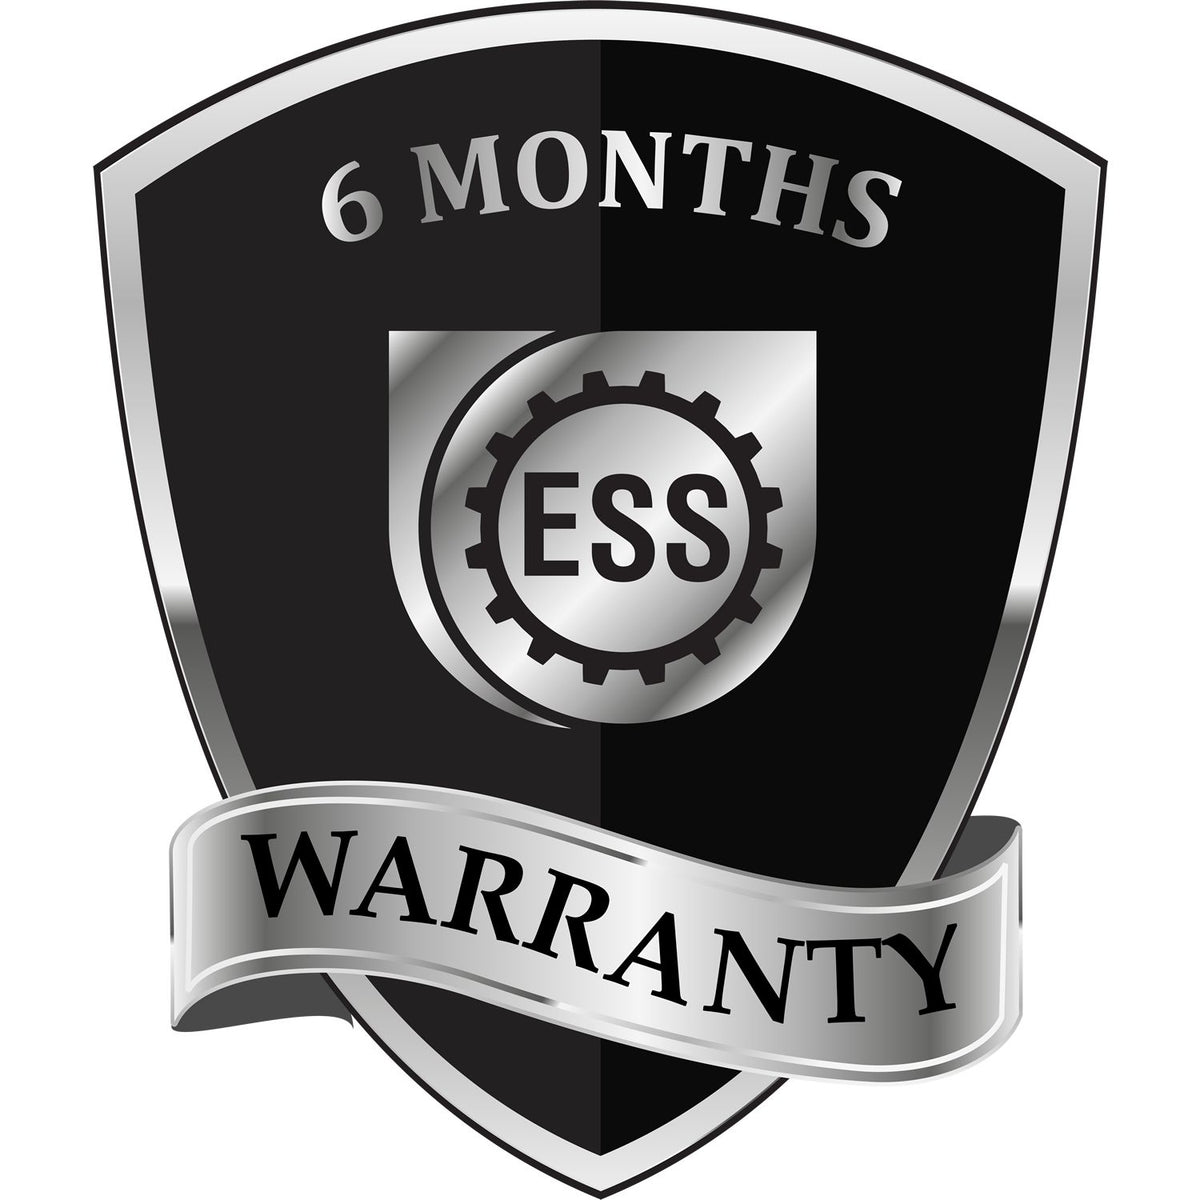 A badge or emblem showing a warranty icon for the Self-Inking Montana Landscape Architect Stamp